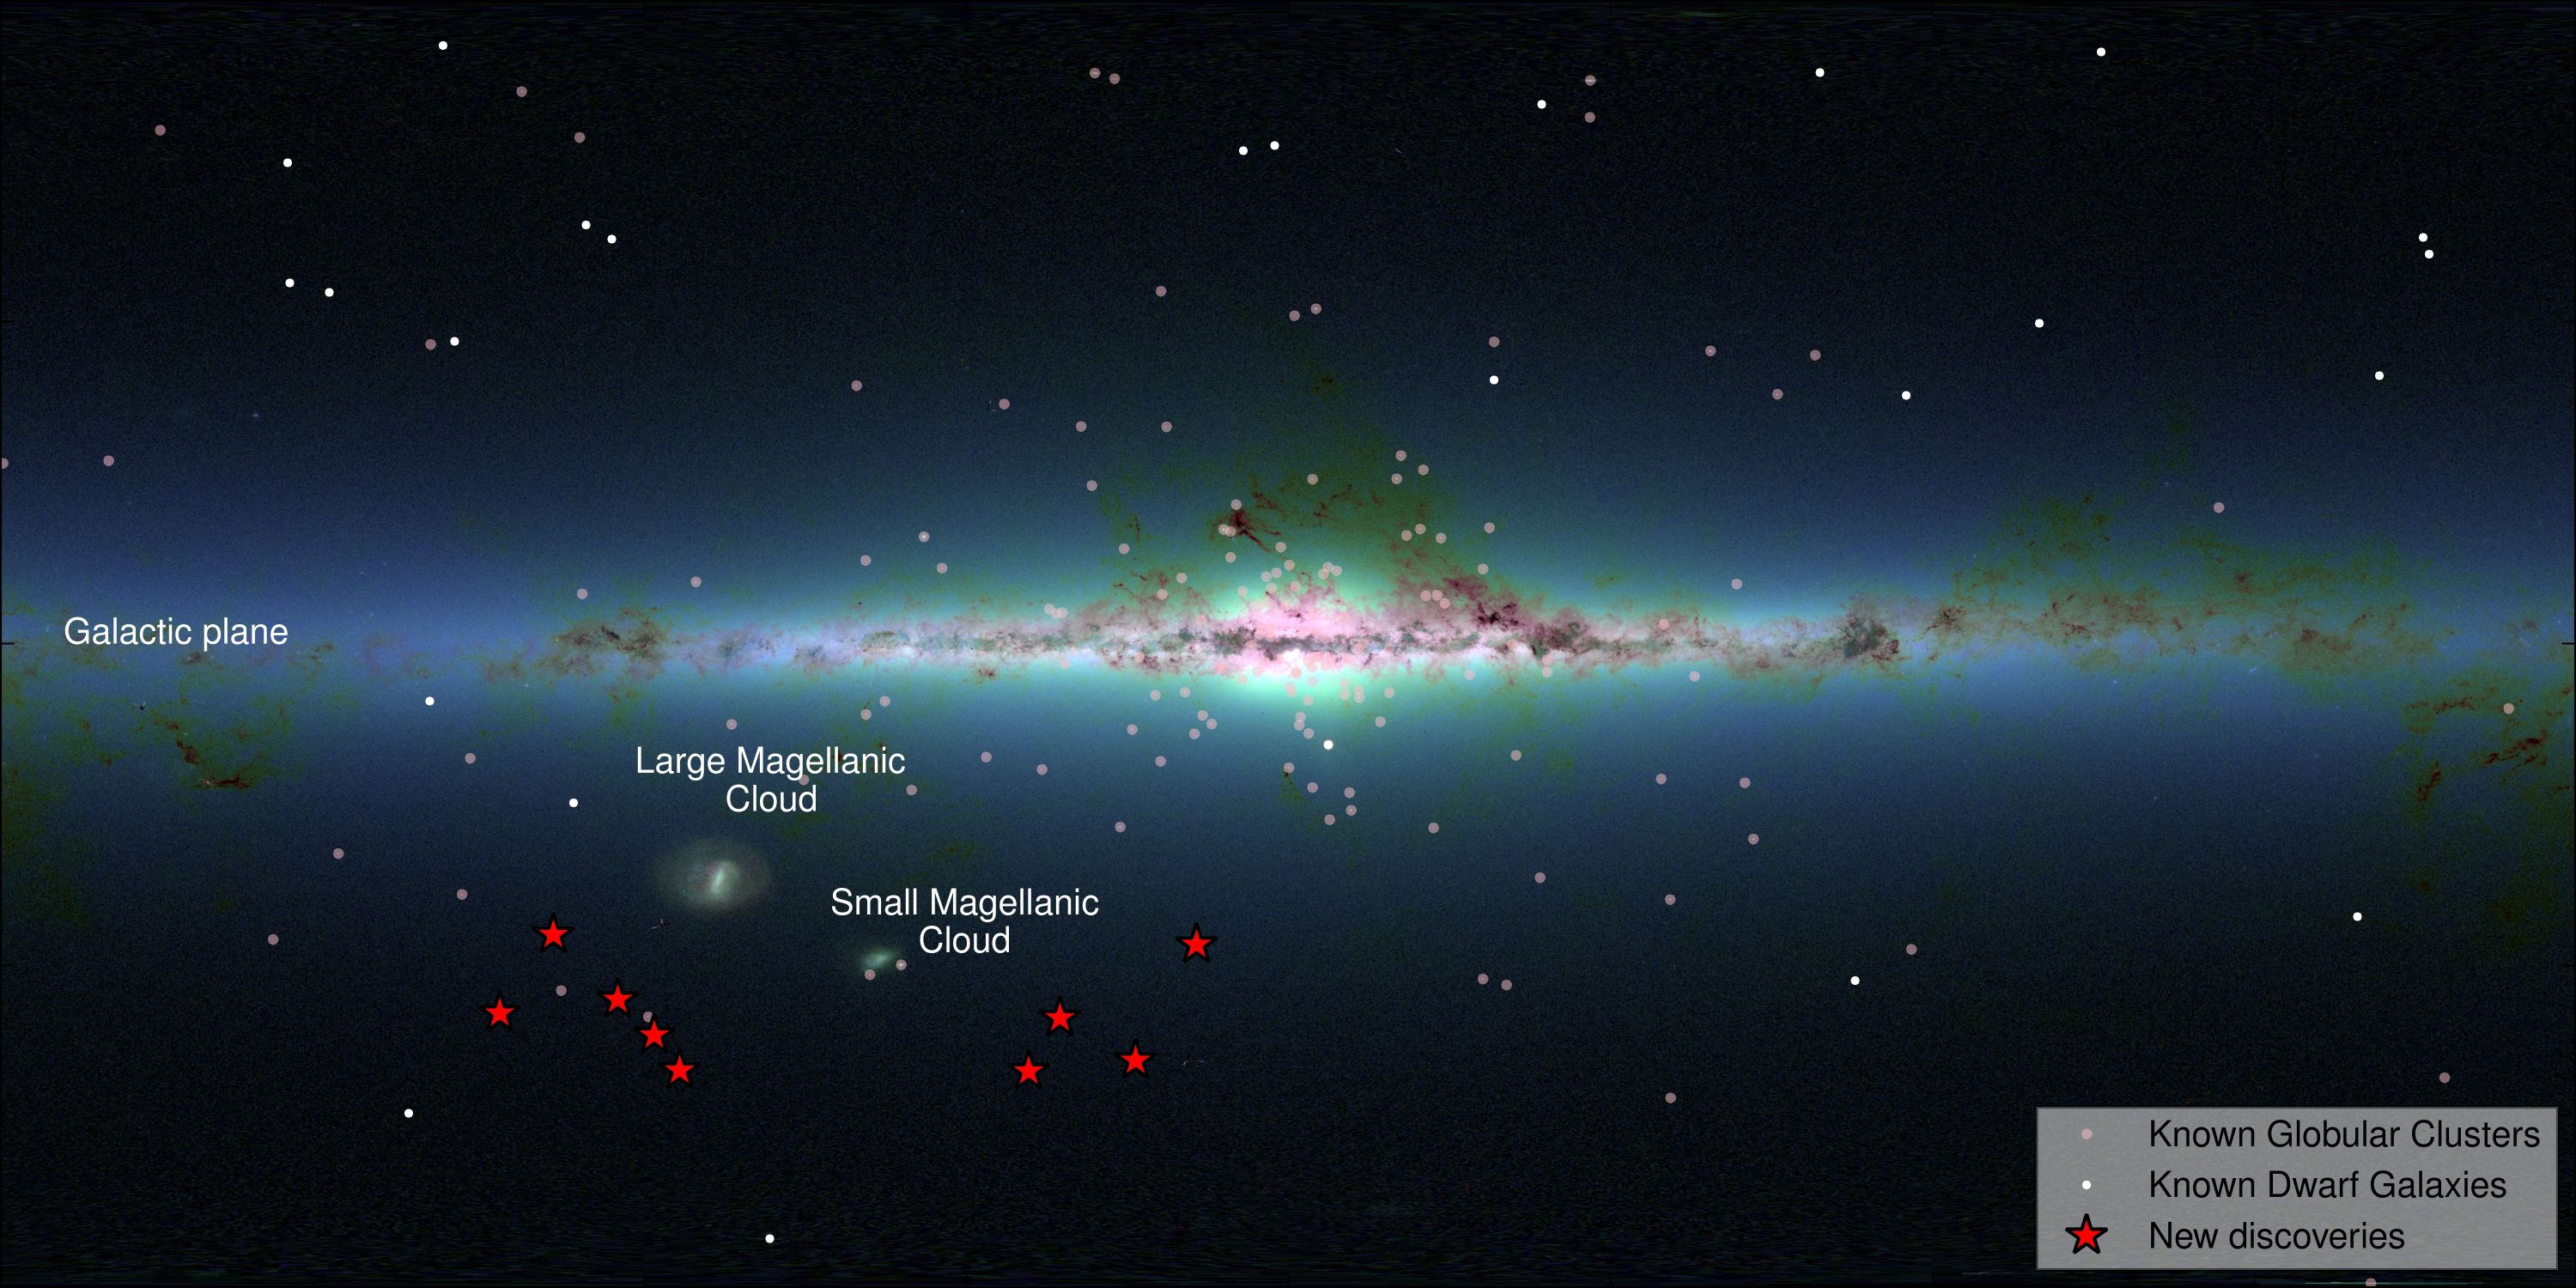 An illustration showing the distribution of the two dozen known dwarf satellite galaxies around the Milky Way. Astronomers have recently discovered nine more additional such candidate objects below the plane of the galaxy, shown here in red. Image Credit: S. Koposov, V. Belokurov (IoA, Cambridge). Background: 2MASS